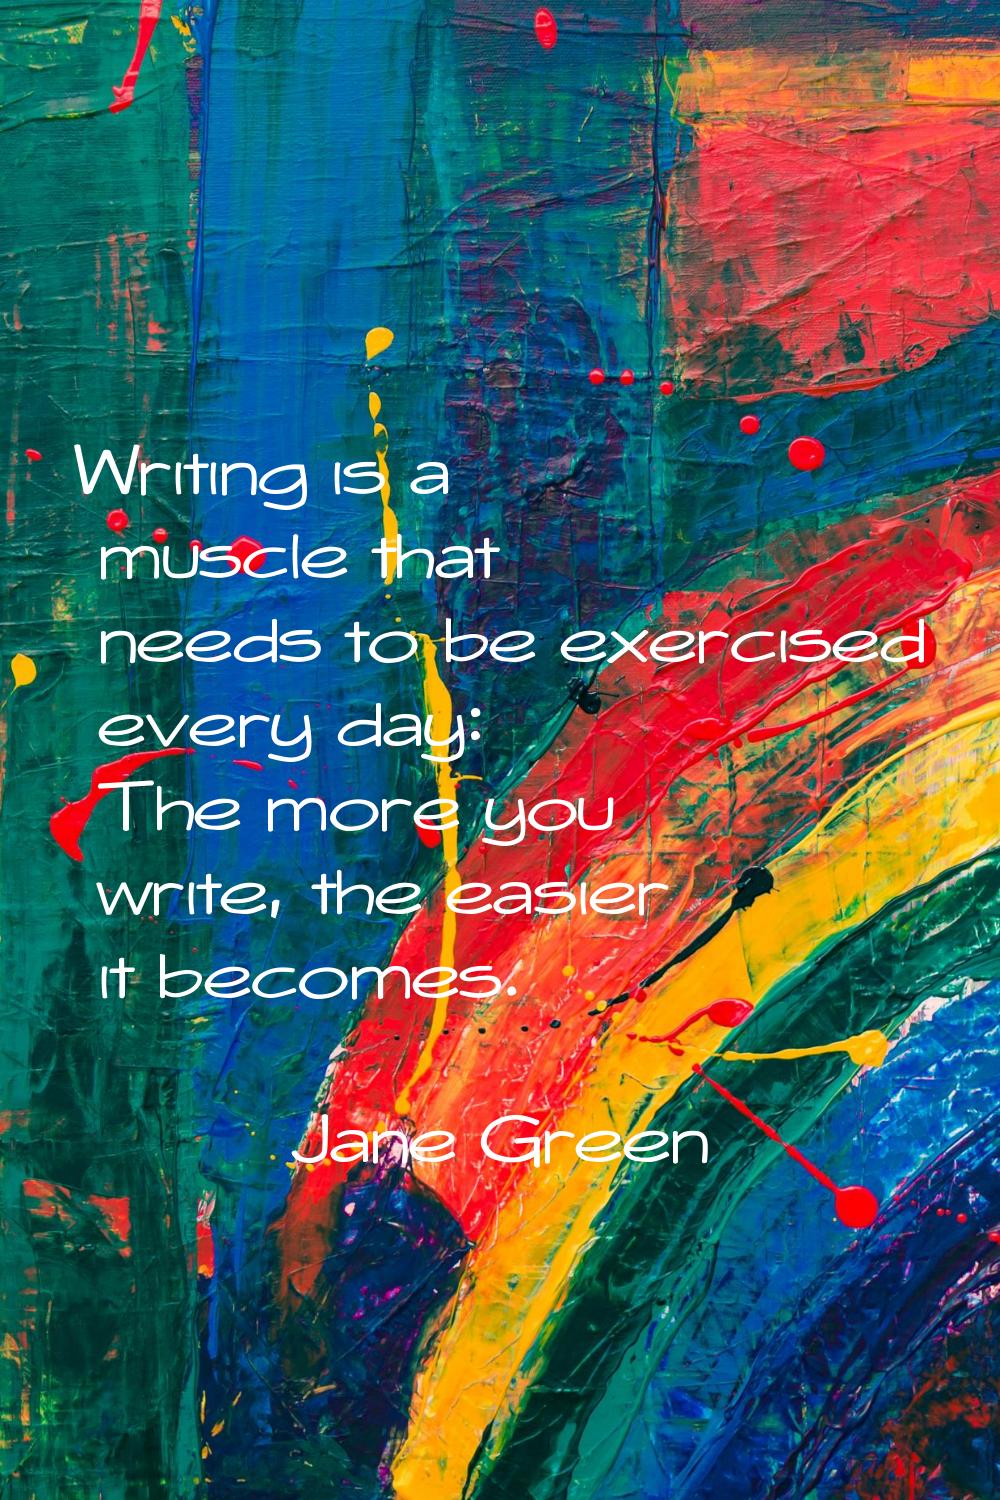 Writing is a muscle that needs to be exercised every day: The more you write, the easier it becomes